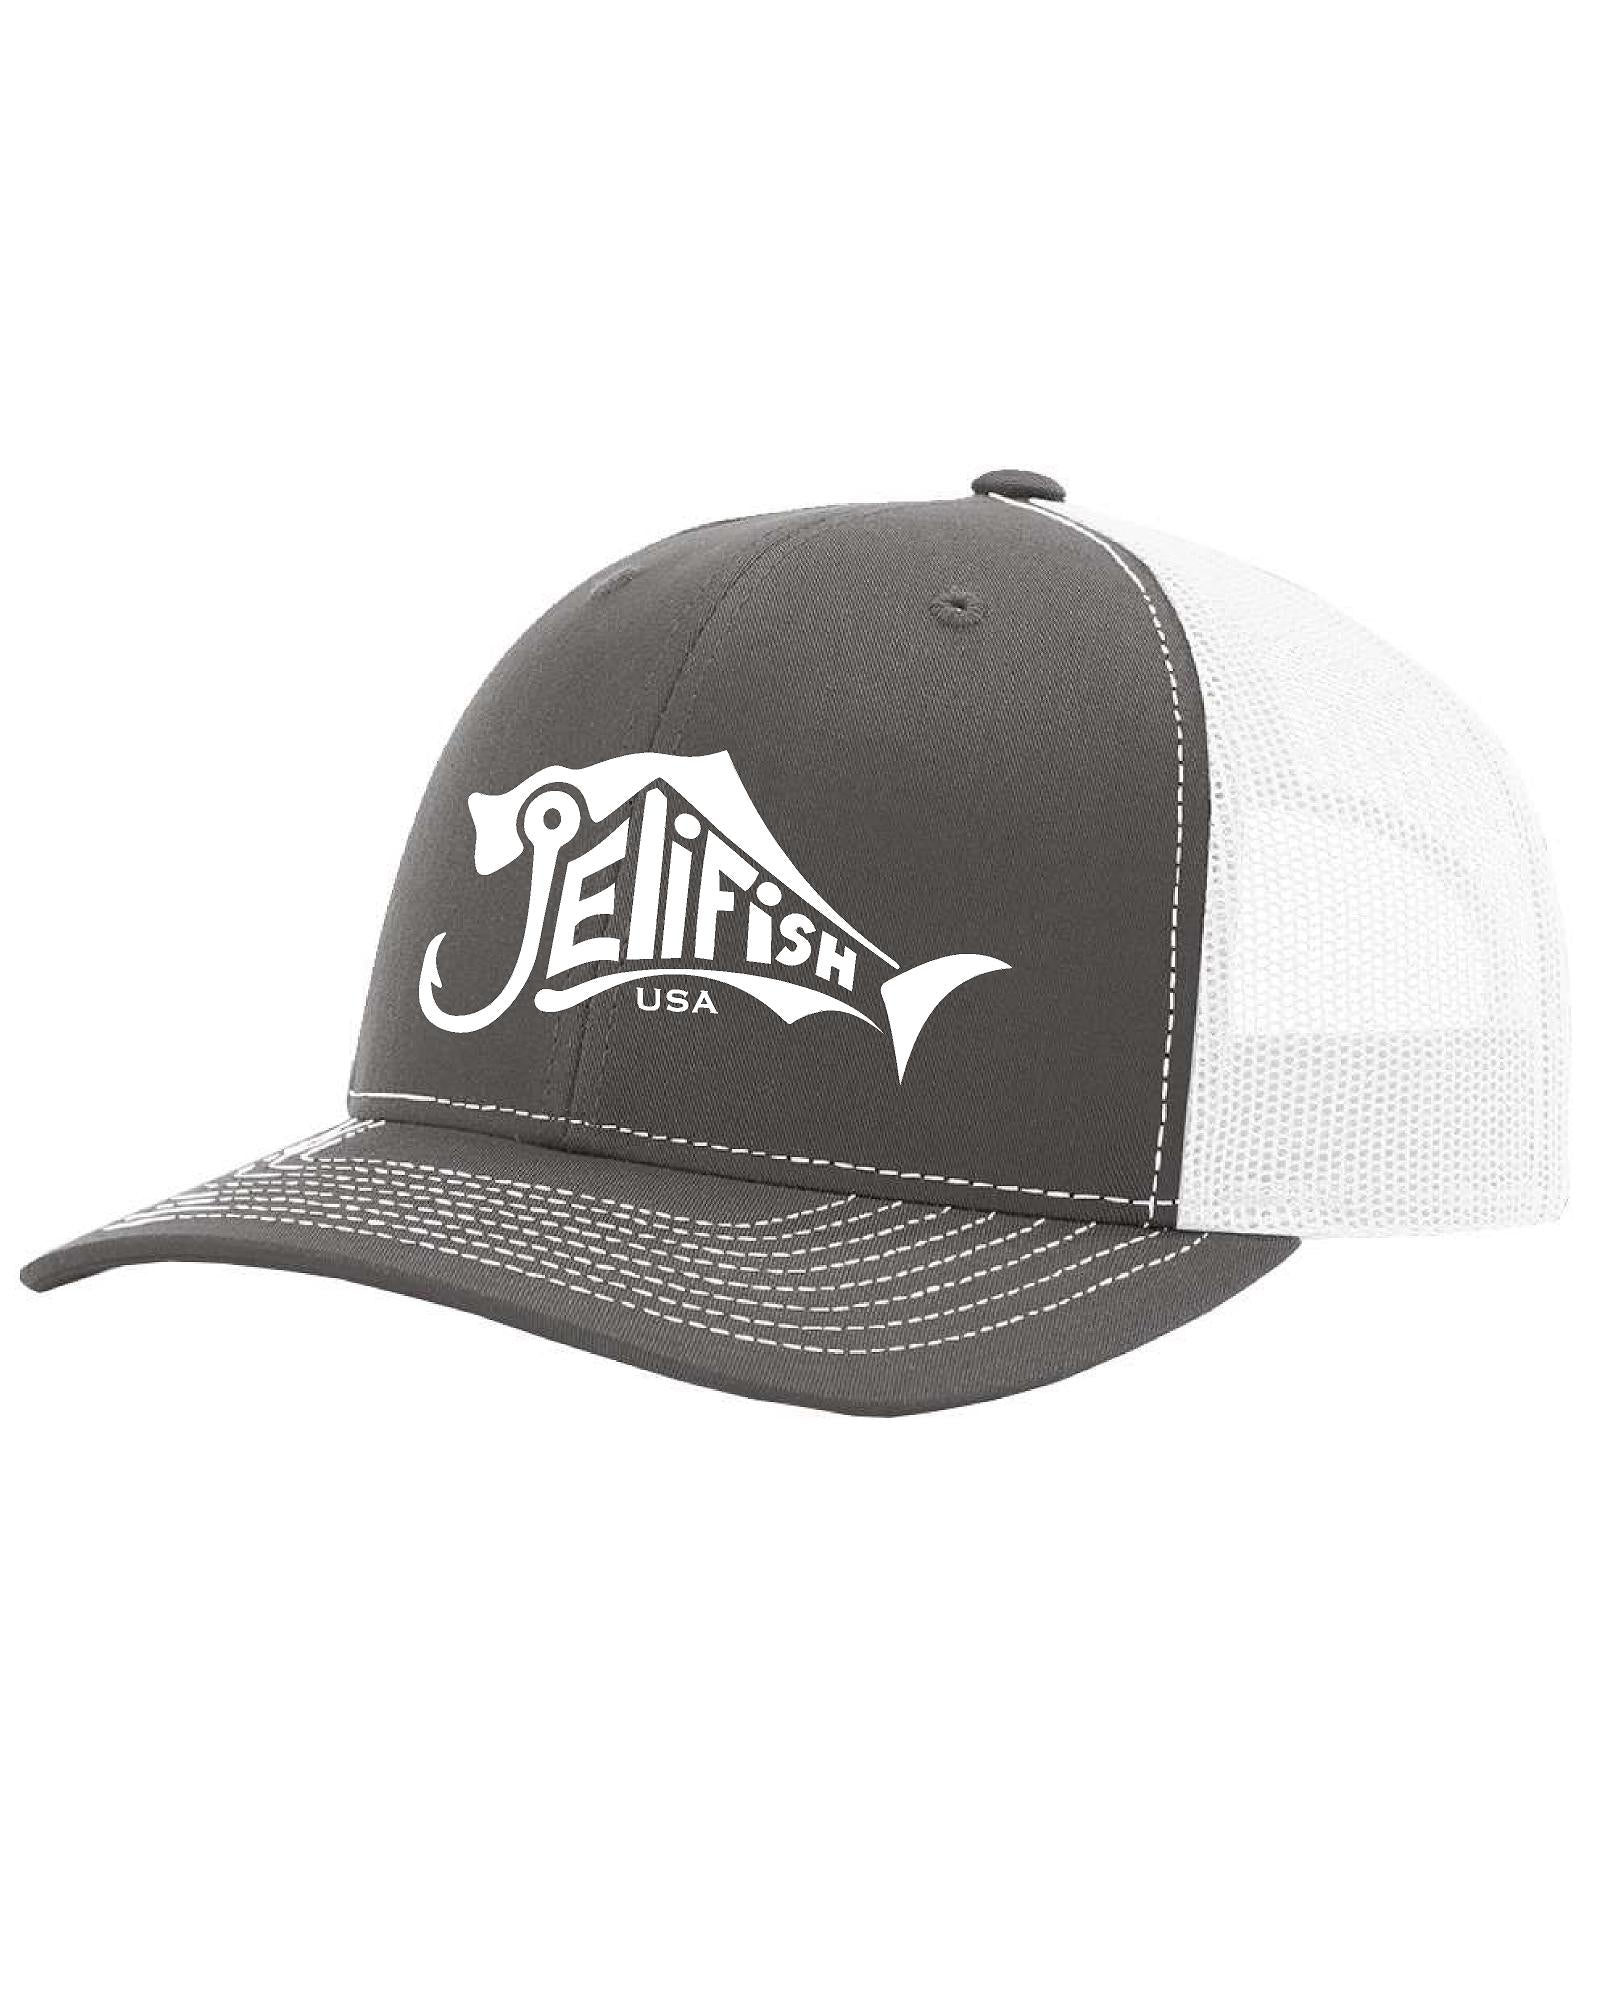 Jelifish USA Embroidered Richardson 112 Trucker Hat in Charcoal Grey / White